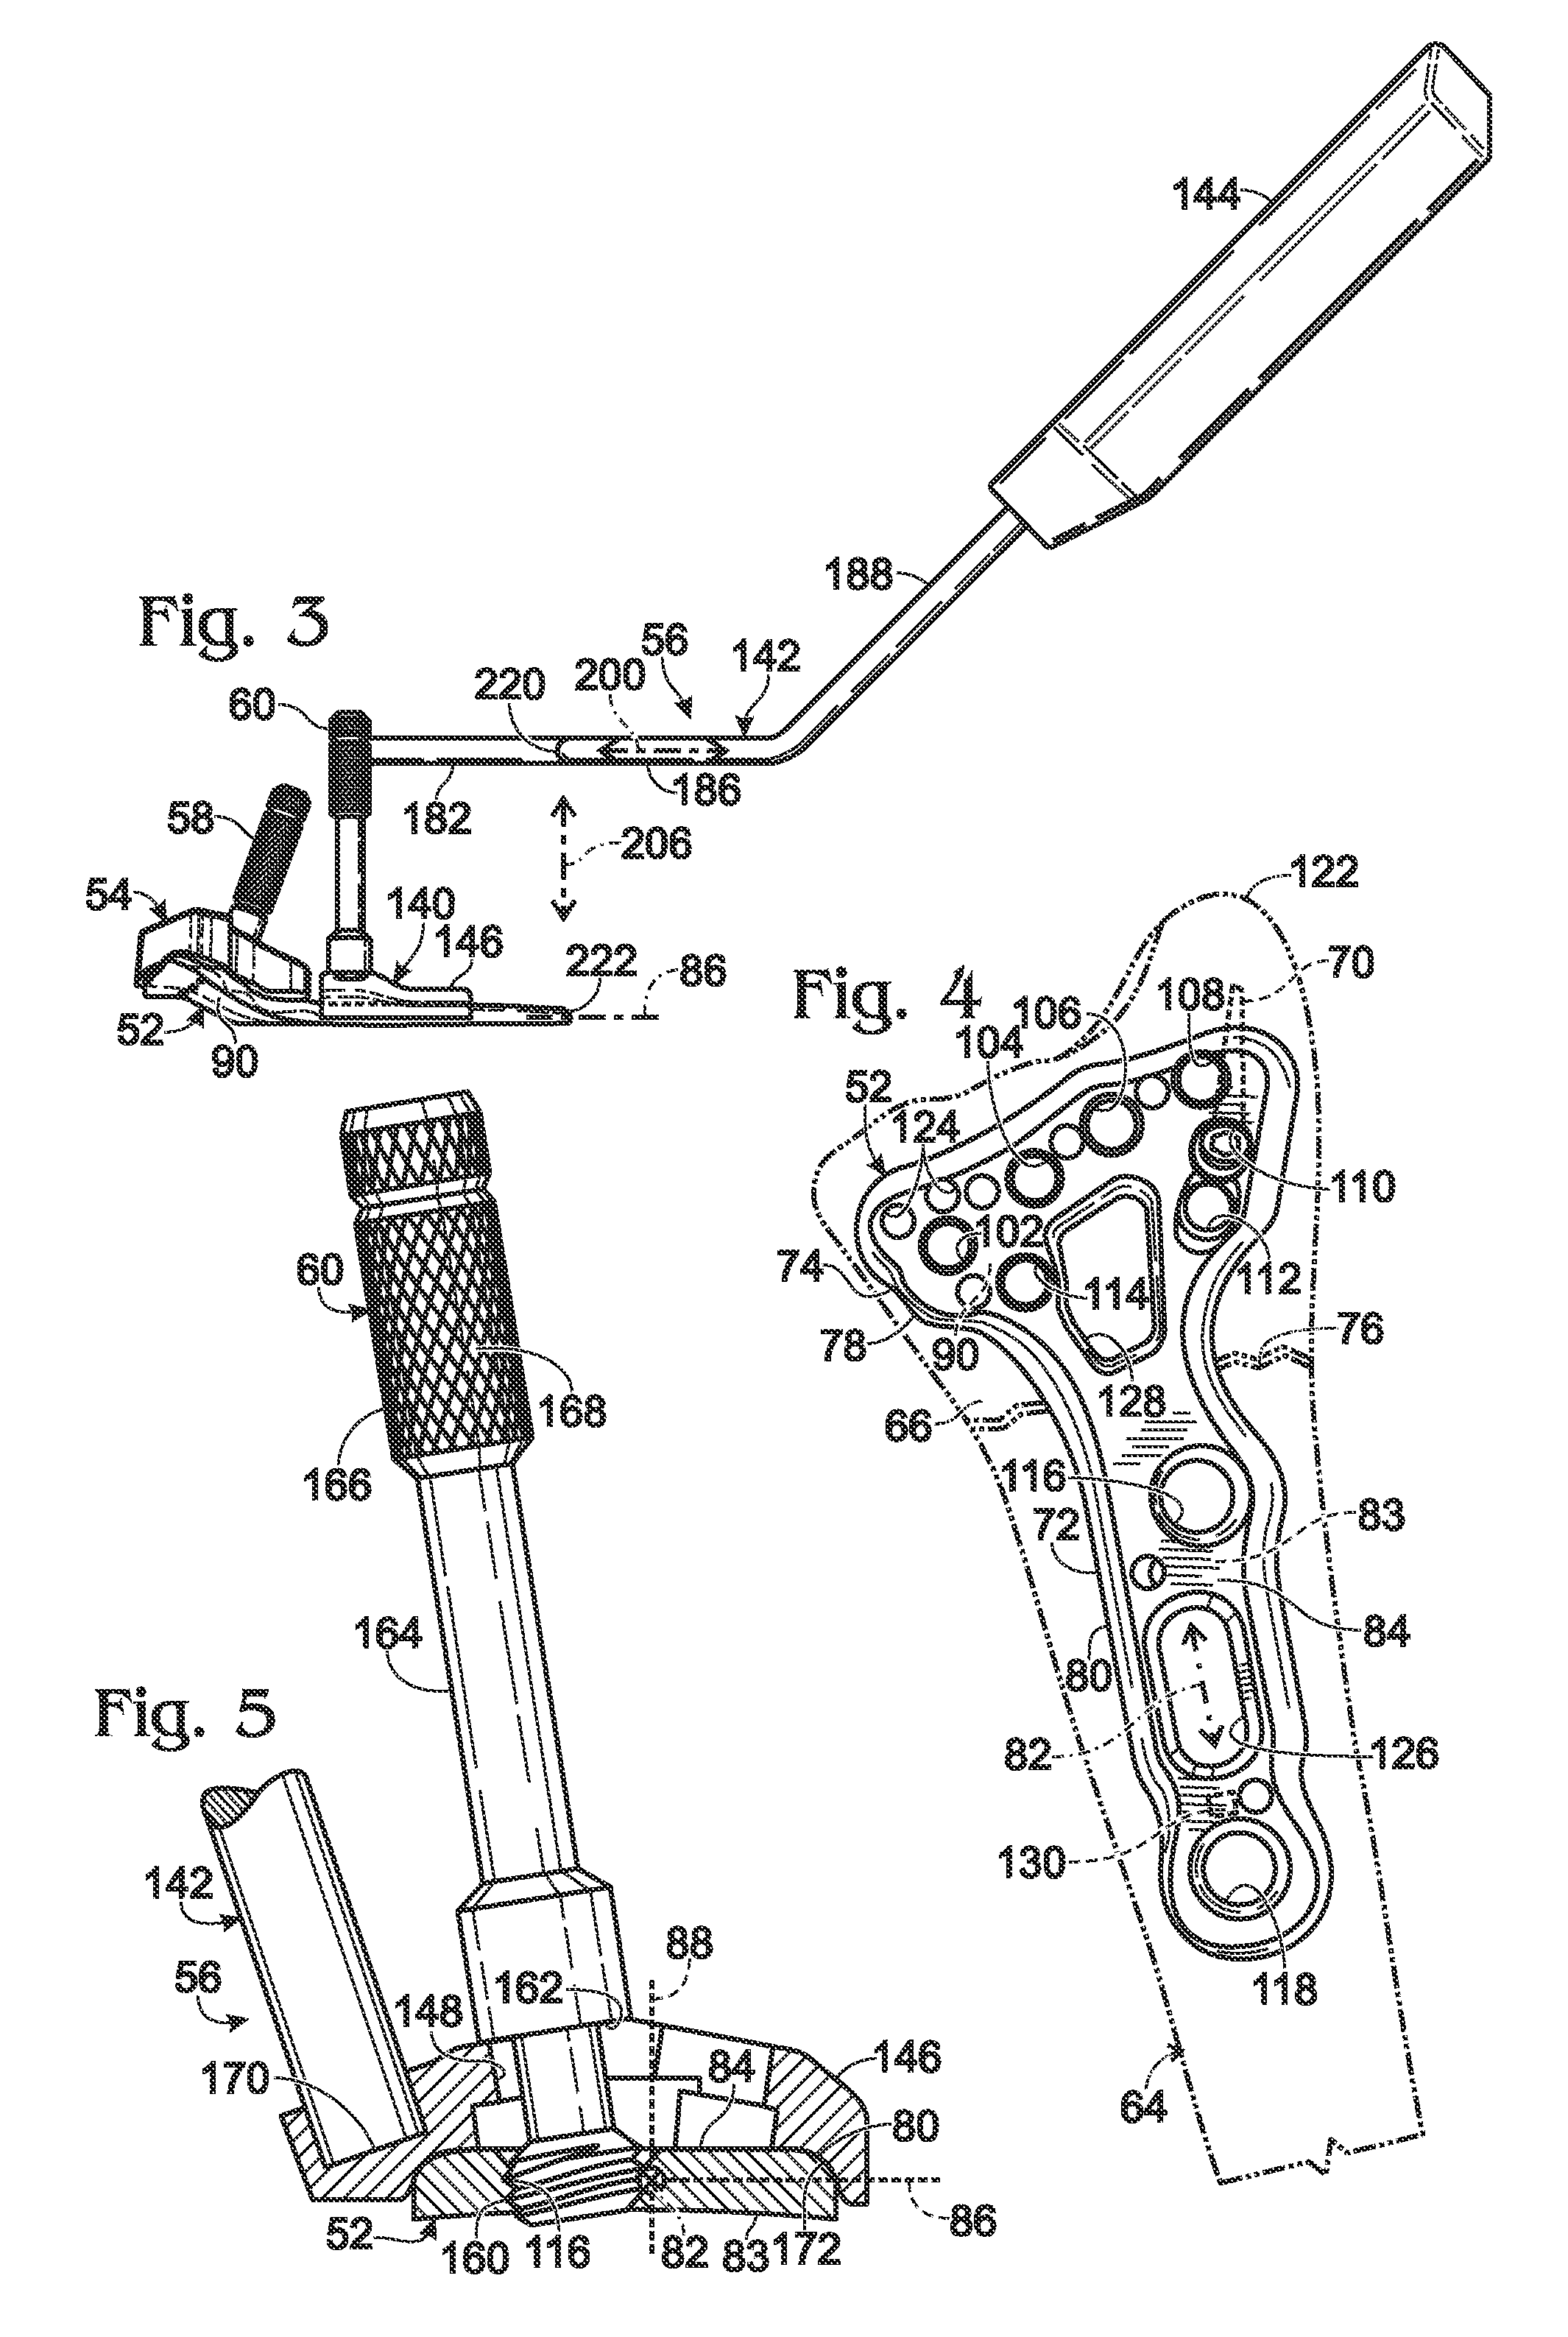 Targeting guide with a radiopaque marker to facilitate positioning a bone plate on bone